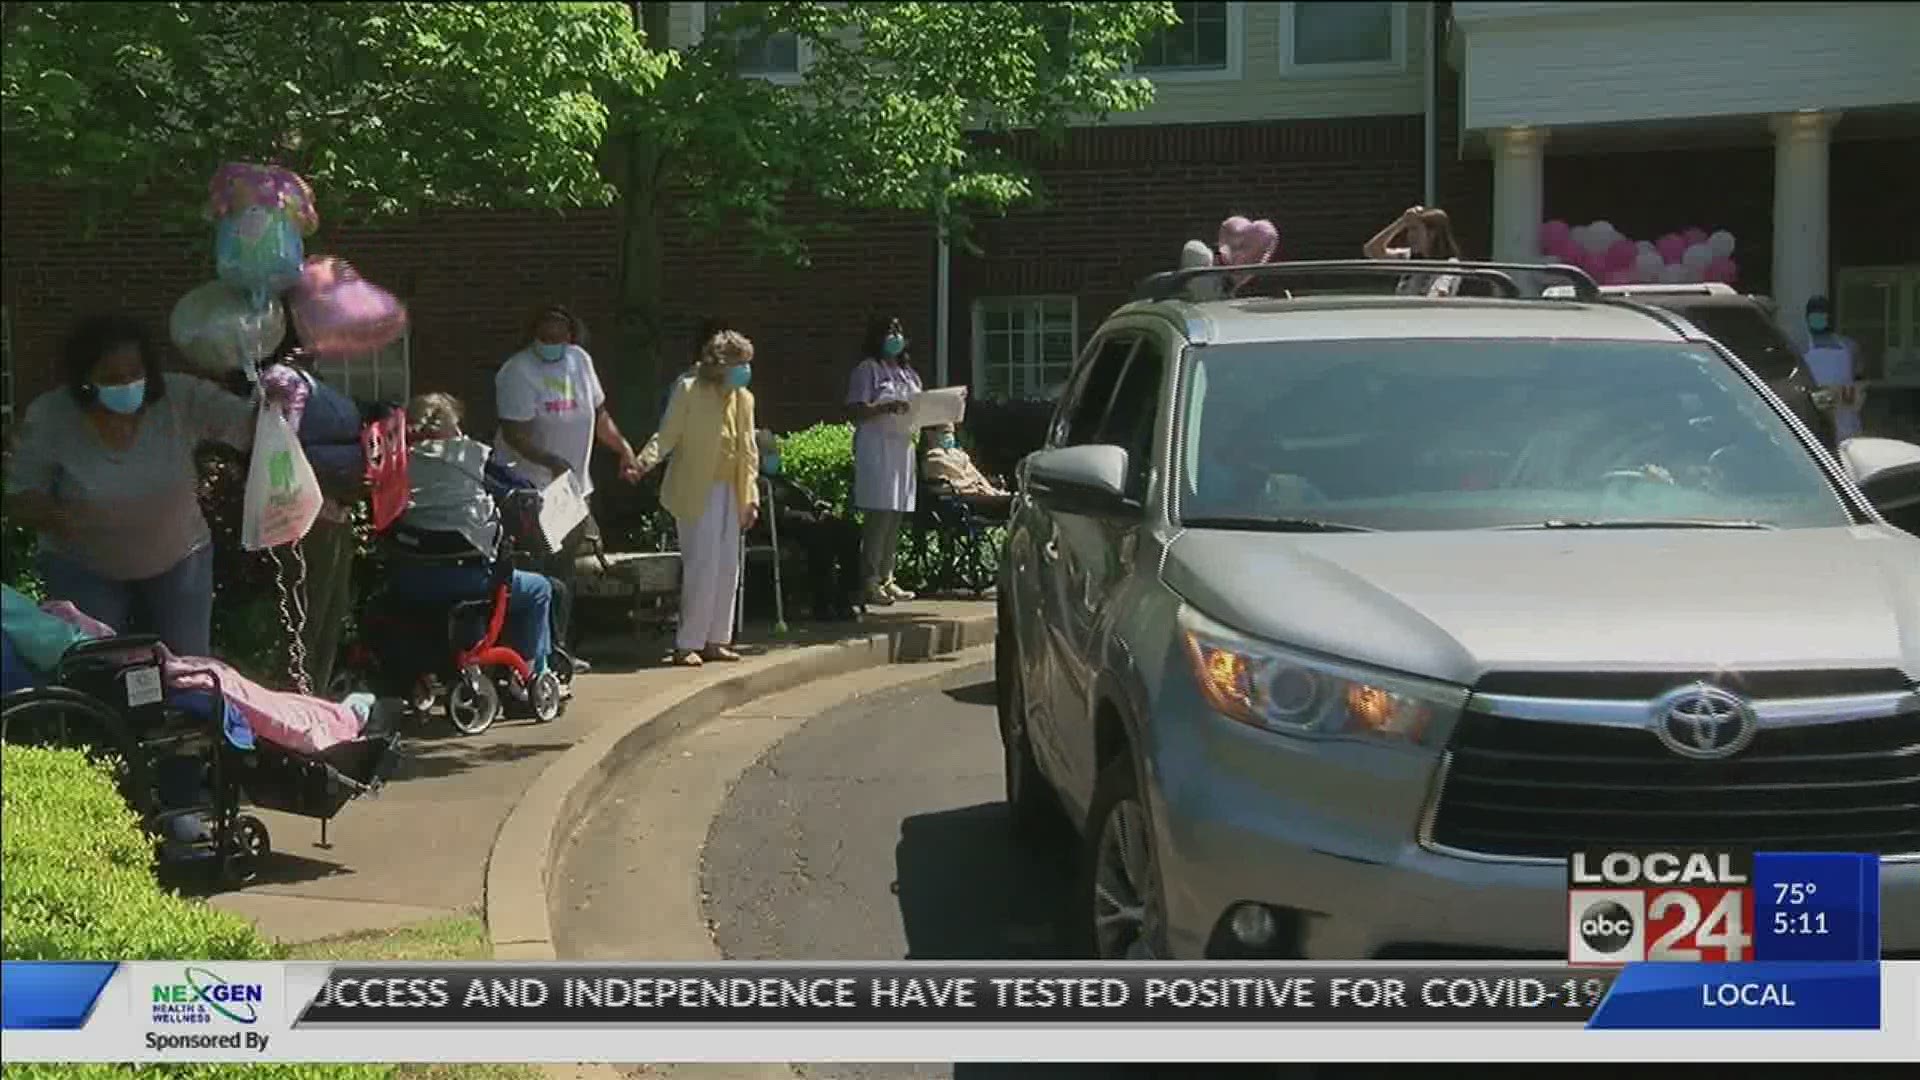 Belmont Village Senior Living facility put on a car parade for all the moms to see their loved ones from a safe distance.